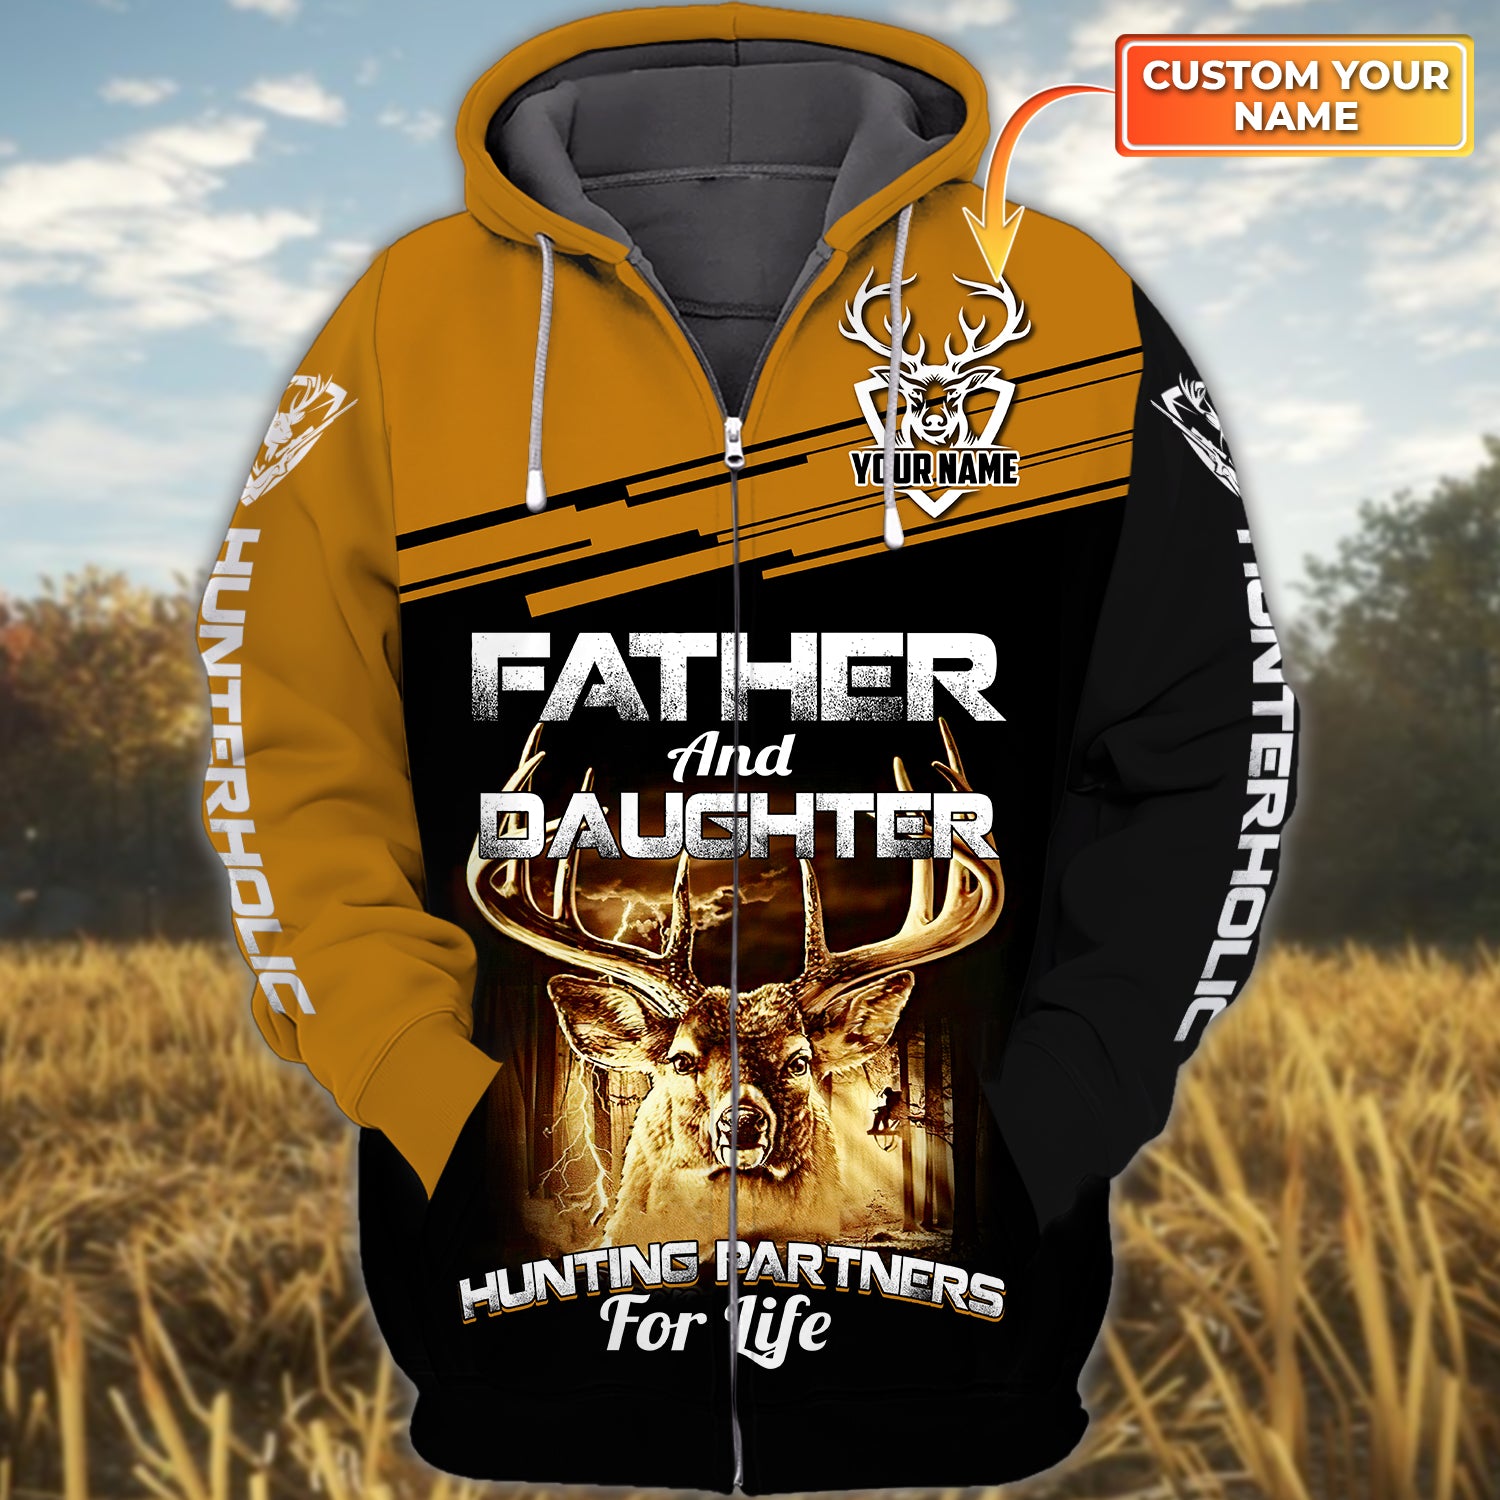 Father And Daughter Hunting Partners For Life - Personalized Name 3D Zipper hoodie - TAD 231